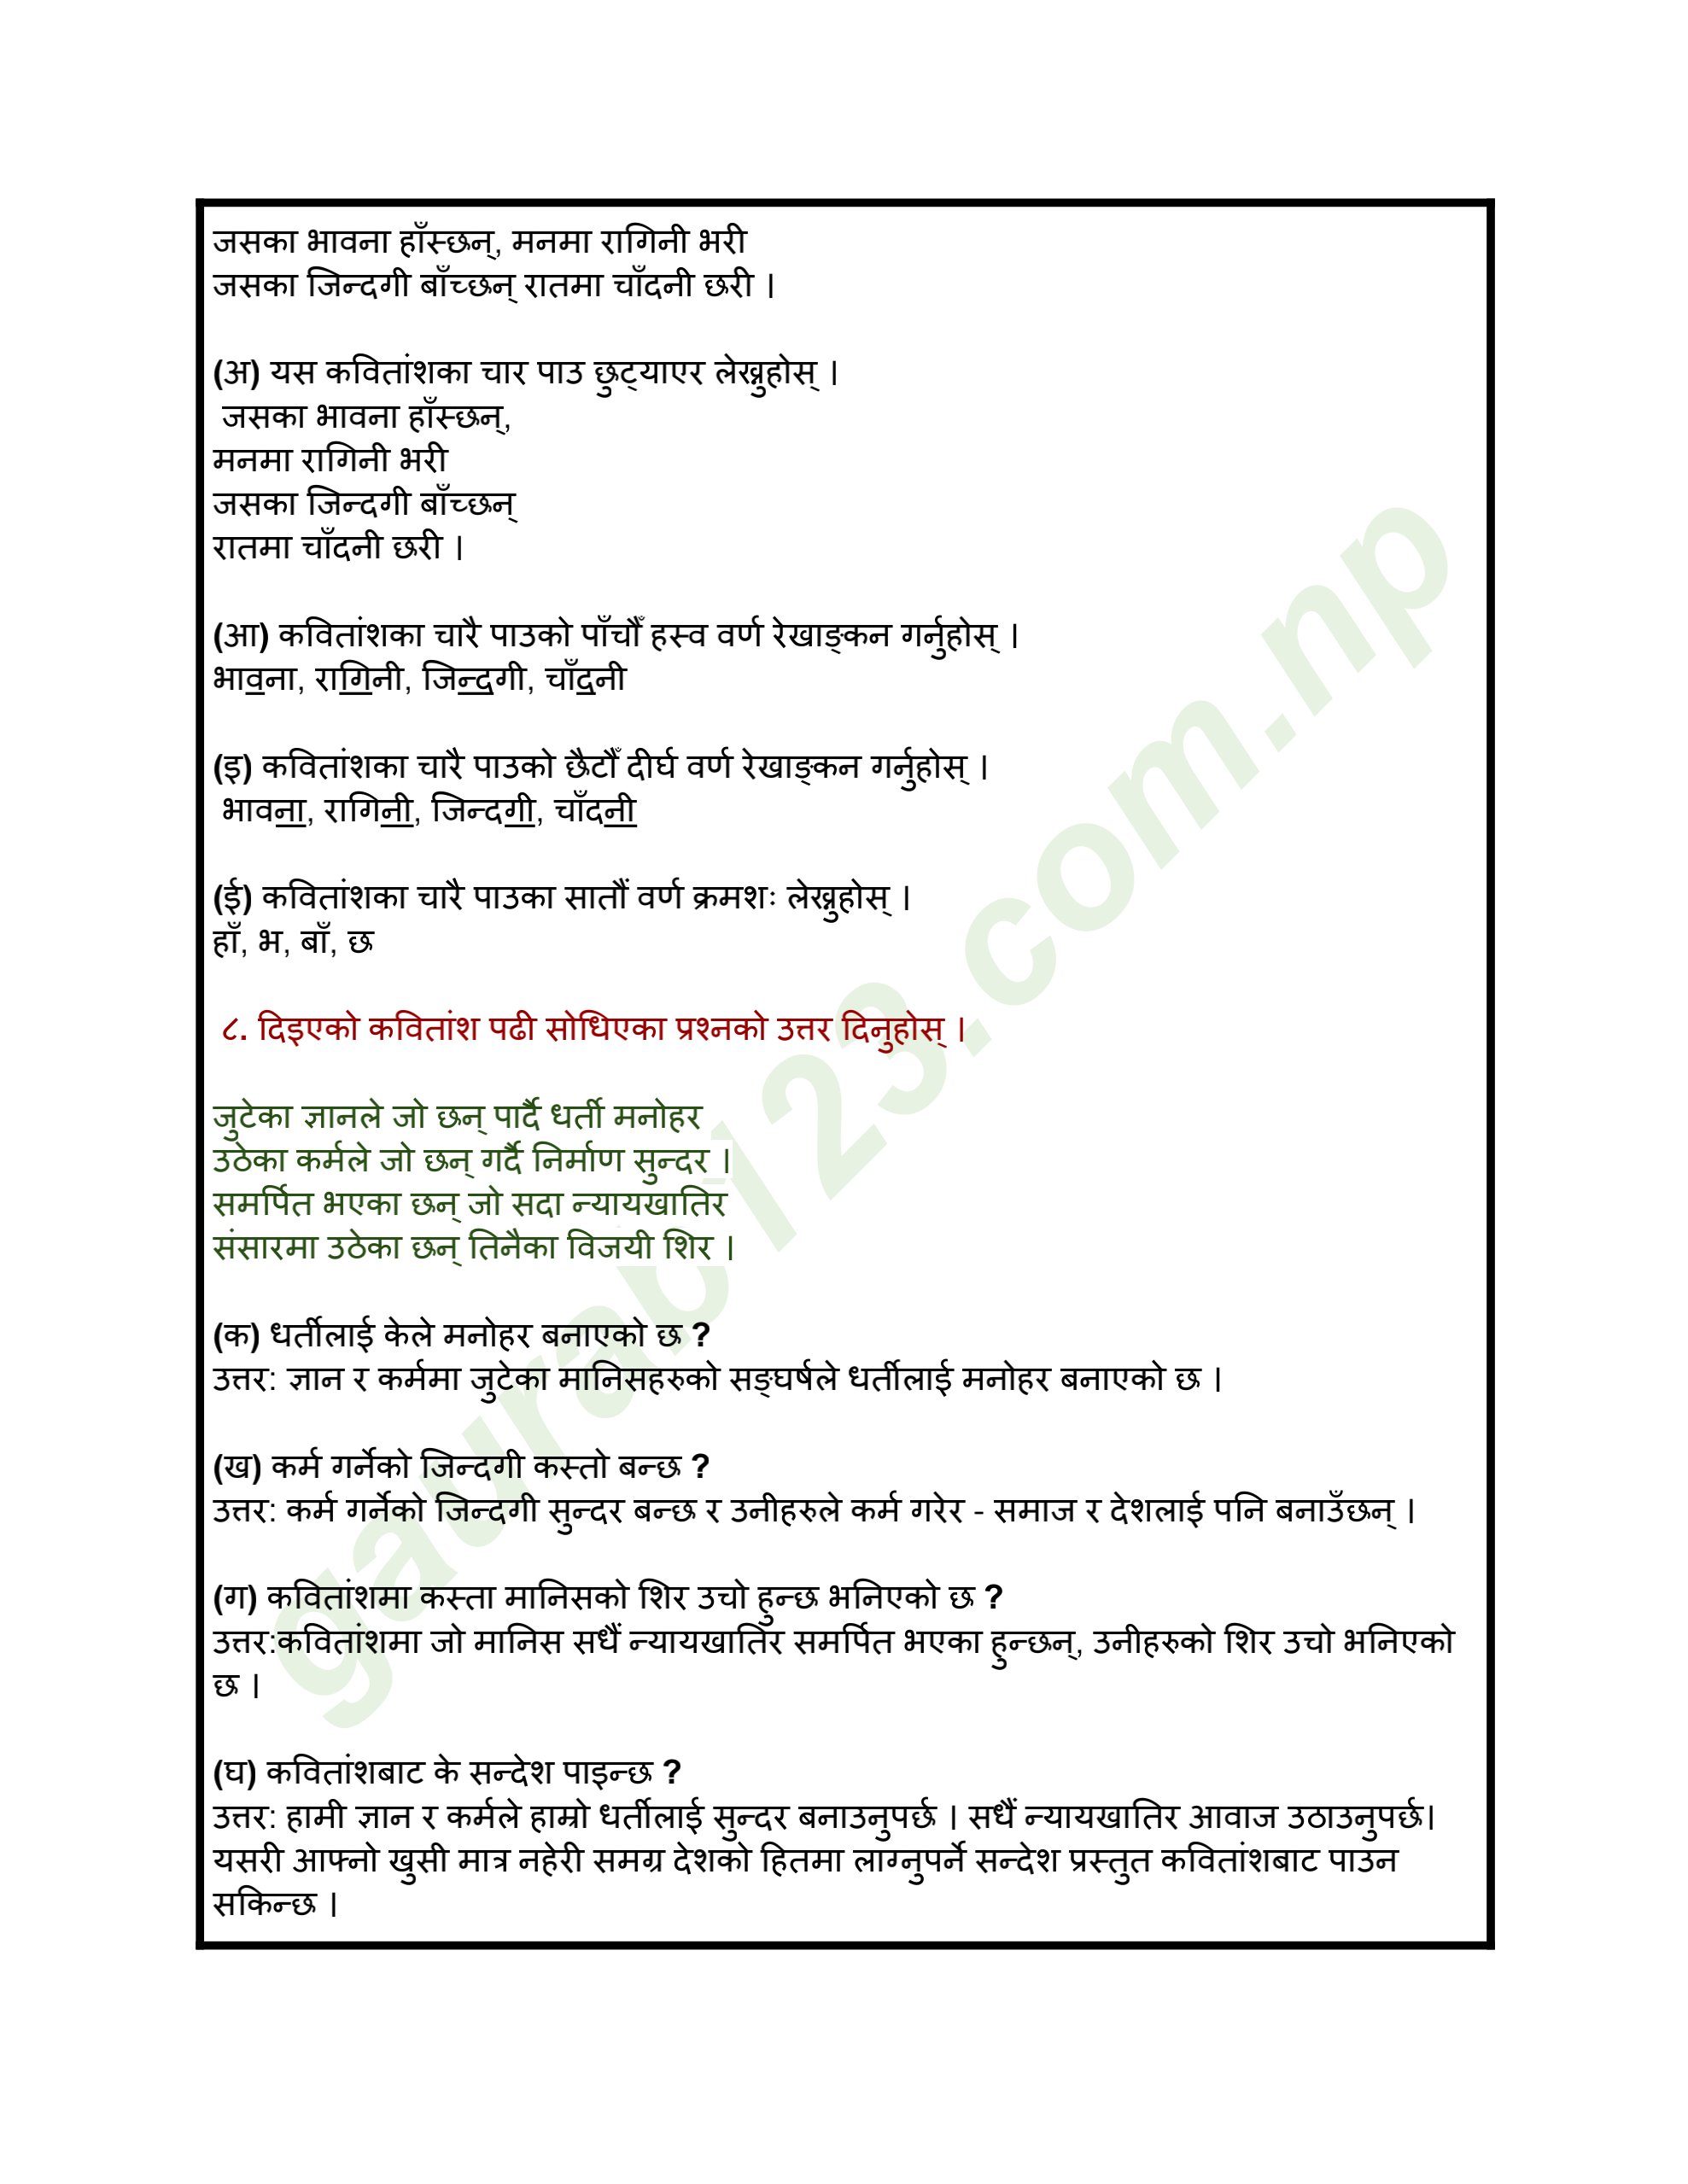 Ujyalo Yatra Exercise: Class 10 Nepali Chapter 1 Questions and Answers